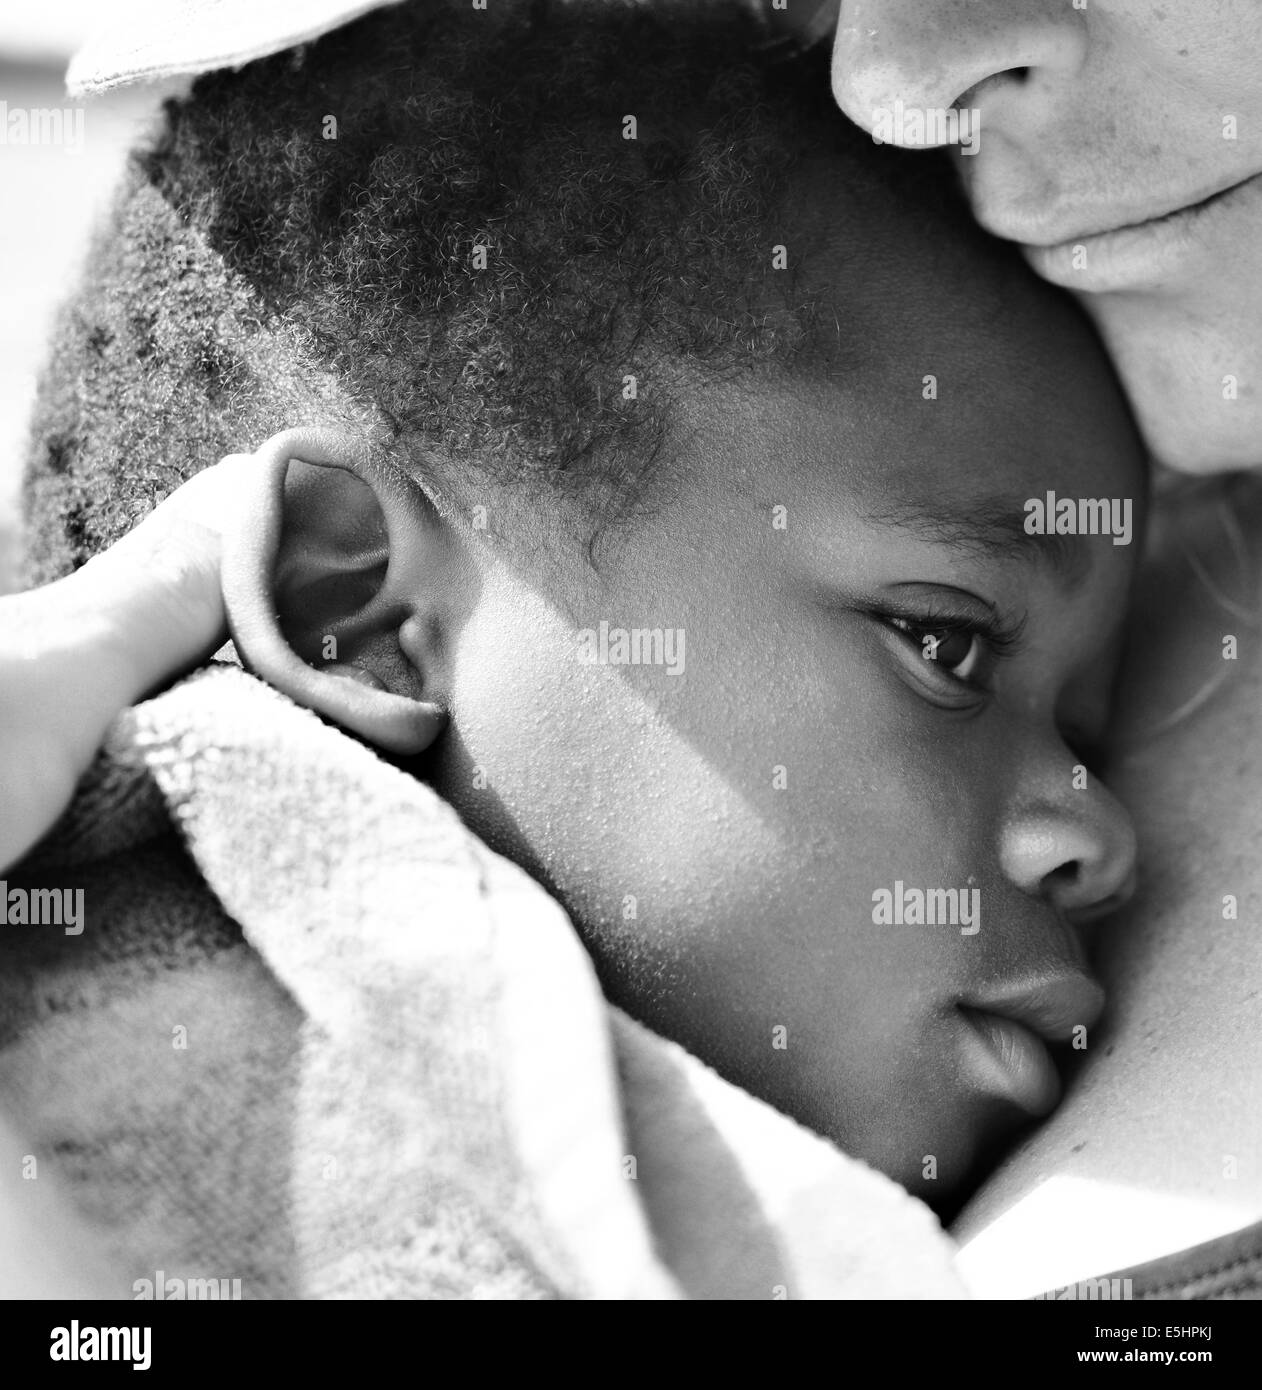 Toddler/baby in BW laying with mom wrapped in a towel Stock Photo